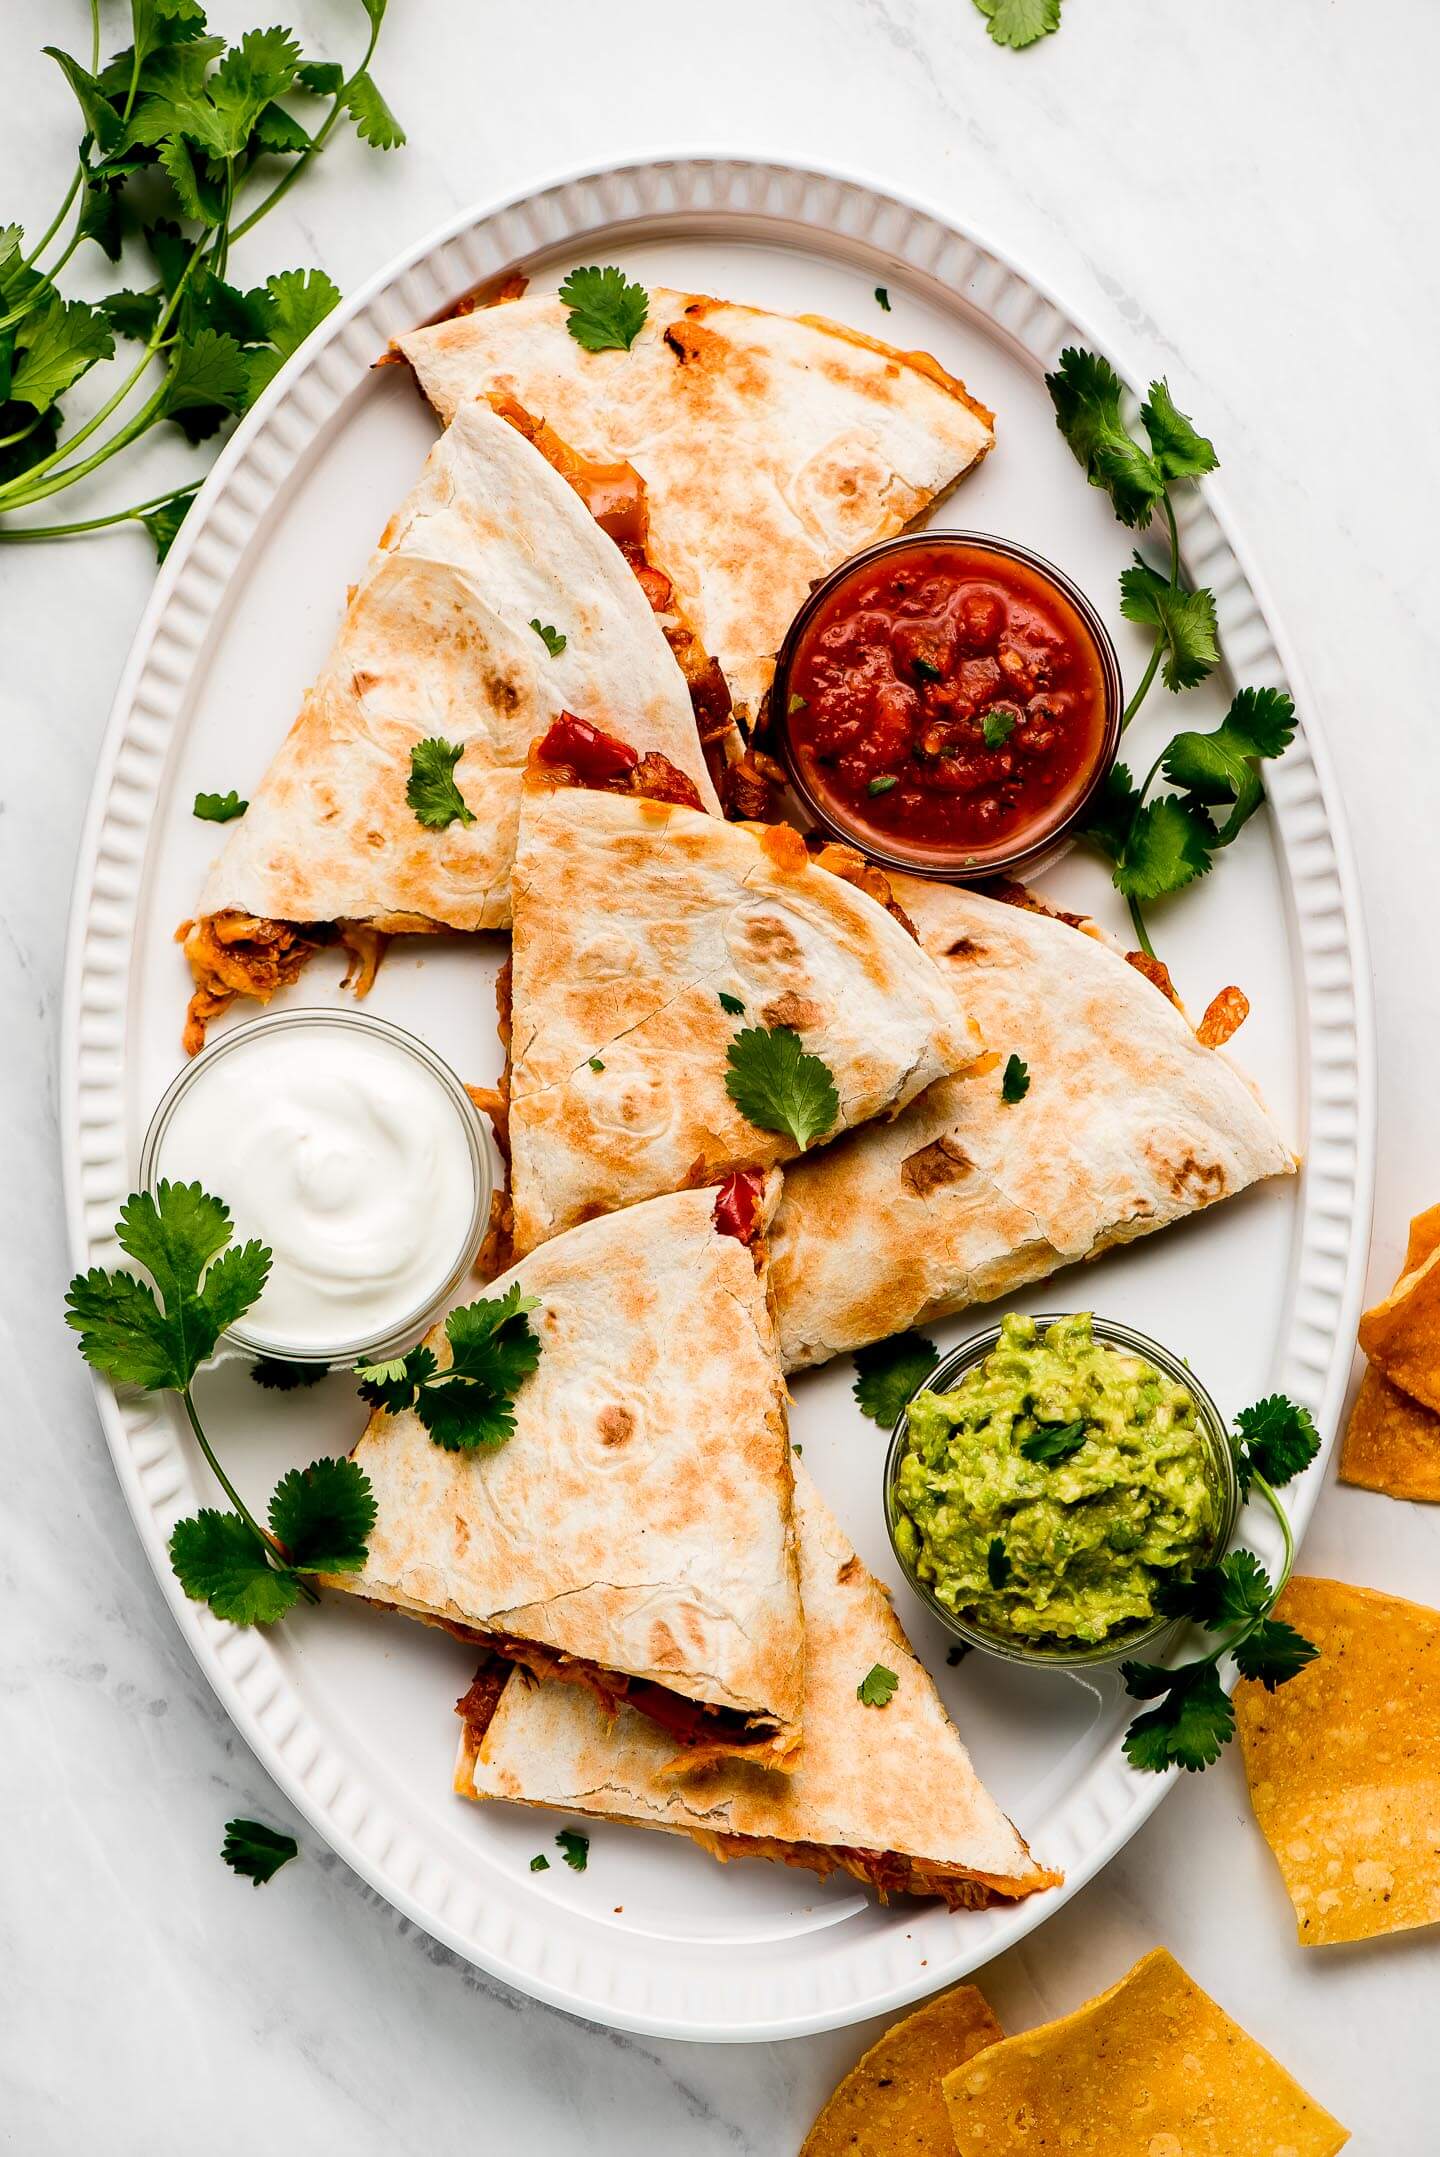 Triangles of quesadillas on a large platter with salsa, sour cream, and guacamole.